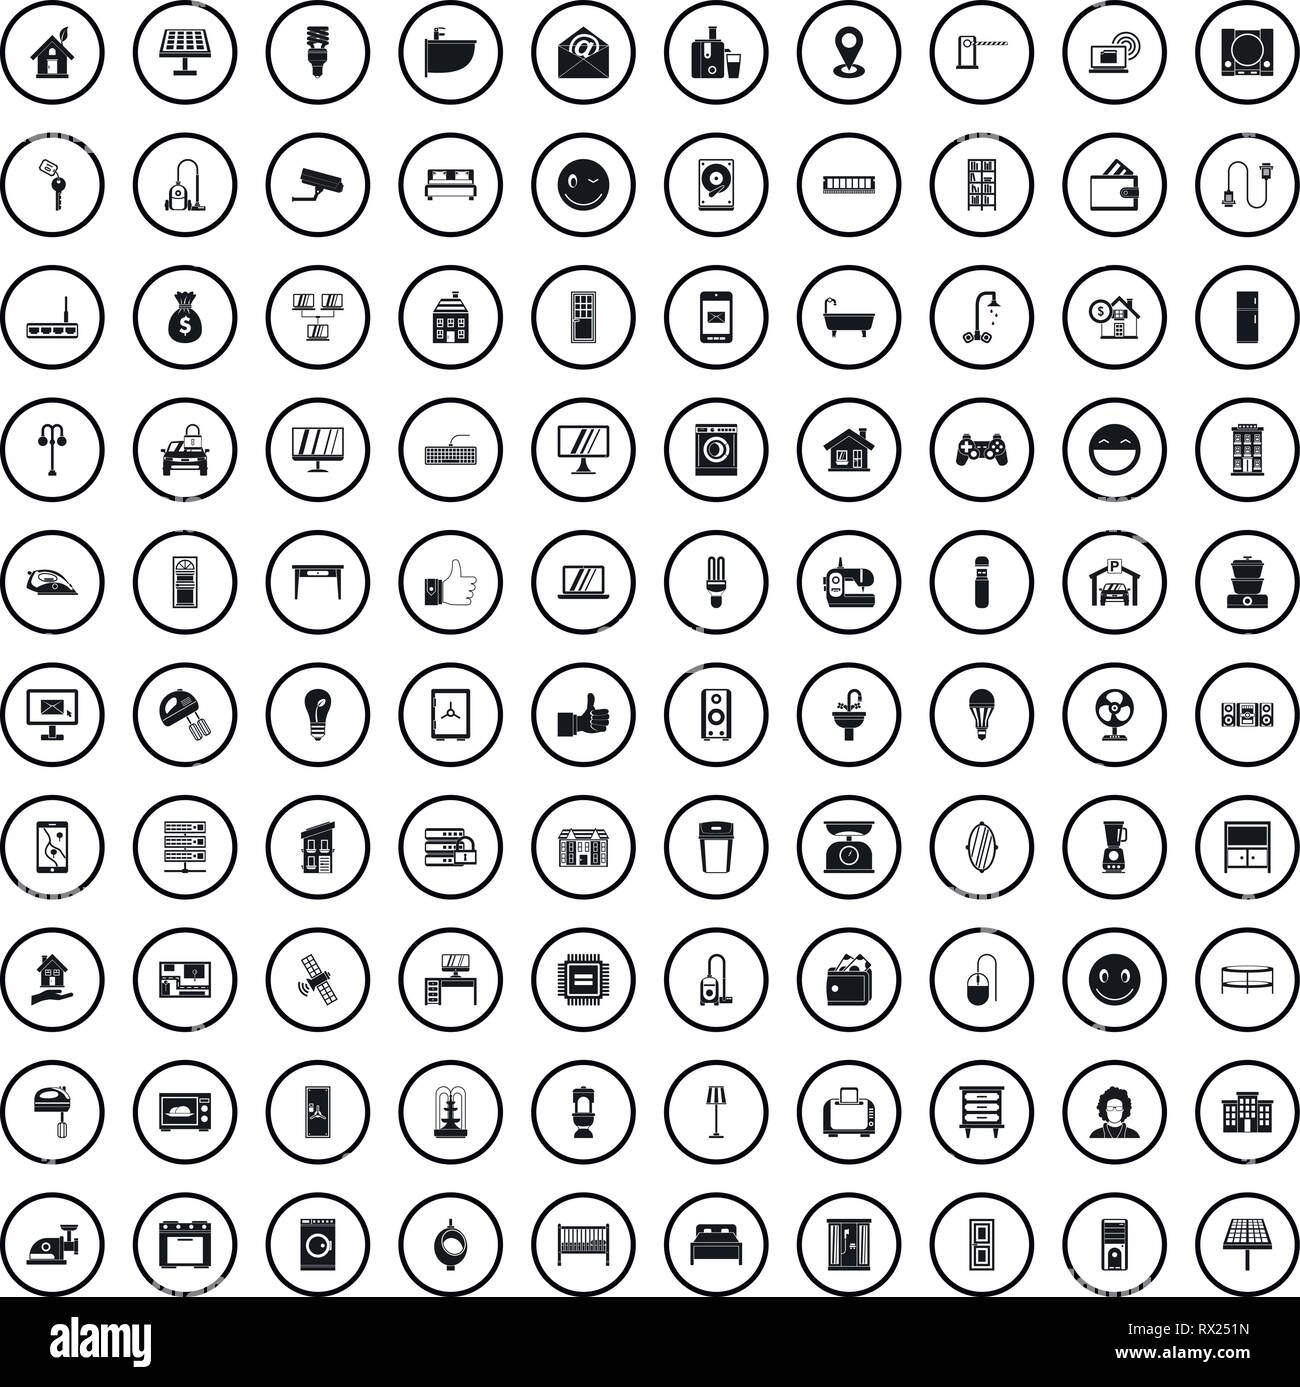 100 smart house icons set in simple style  Stock Vector